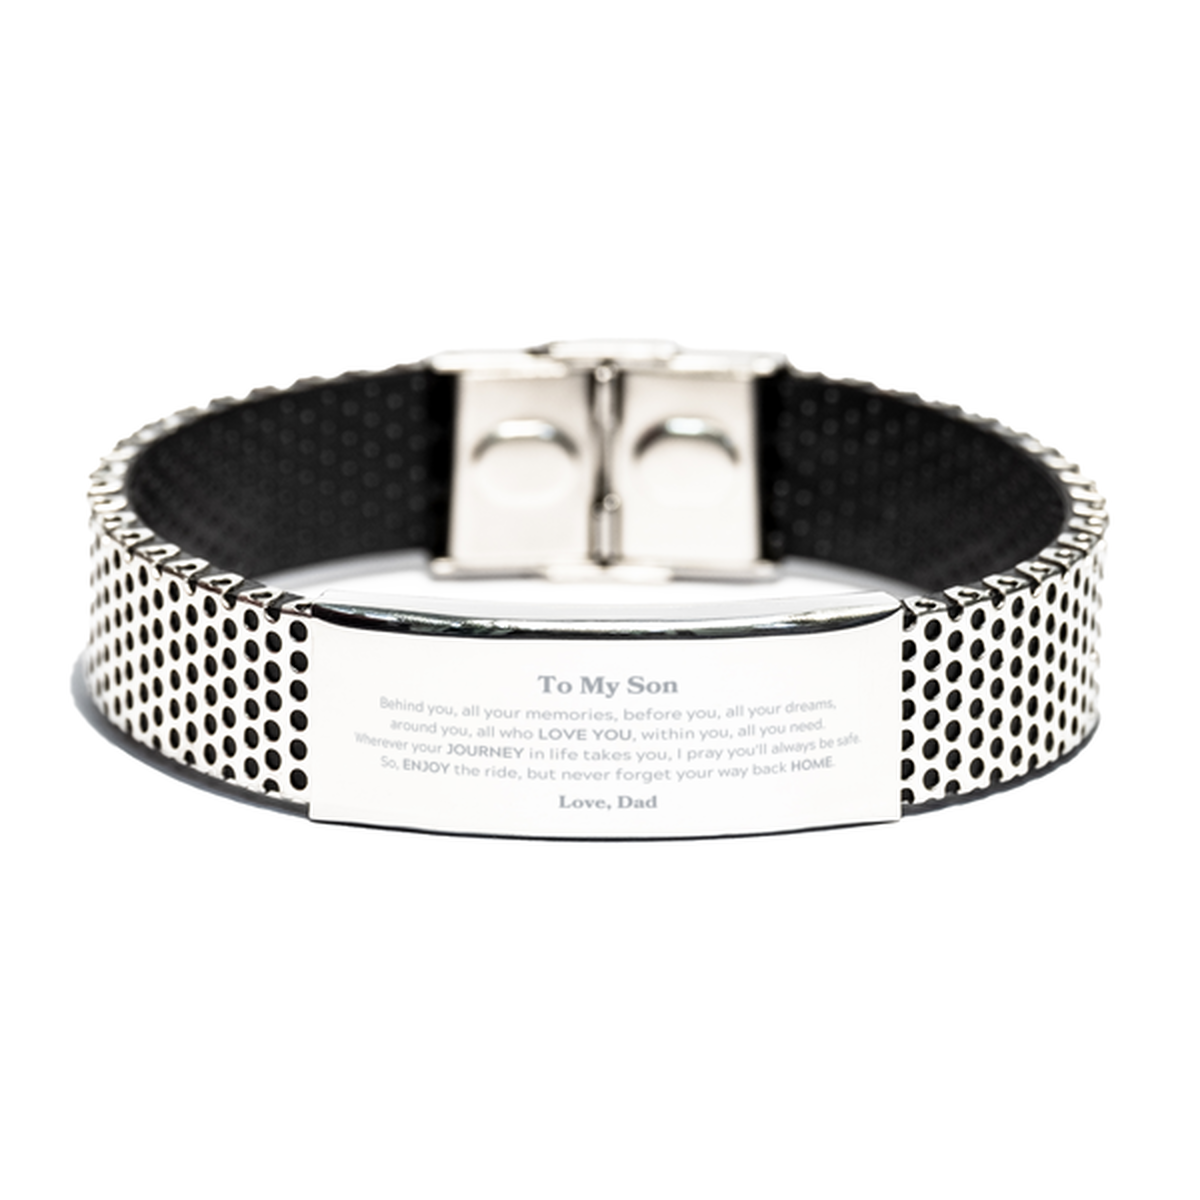 To My Son Graduation Gifts from Dad, Son Stainless Steel Bracelet Christmas Birthday Gifts for Son Behind you, all your memories, before you, all your dreams. Love, Dad